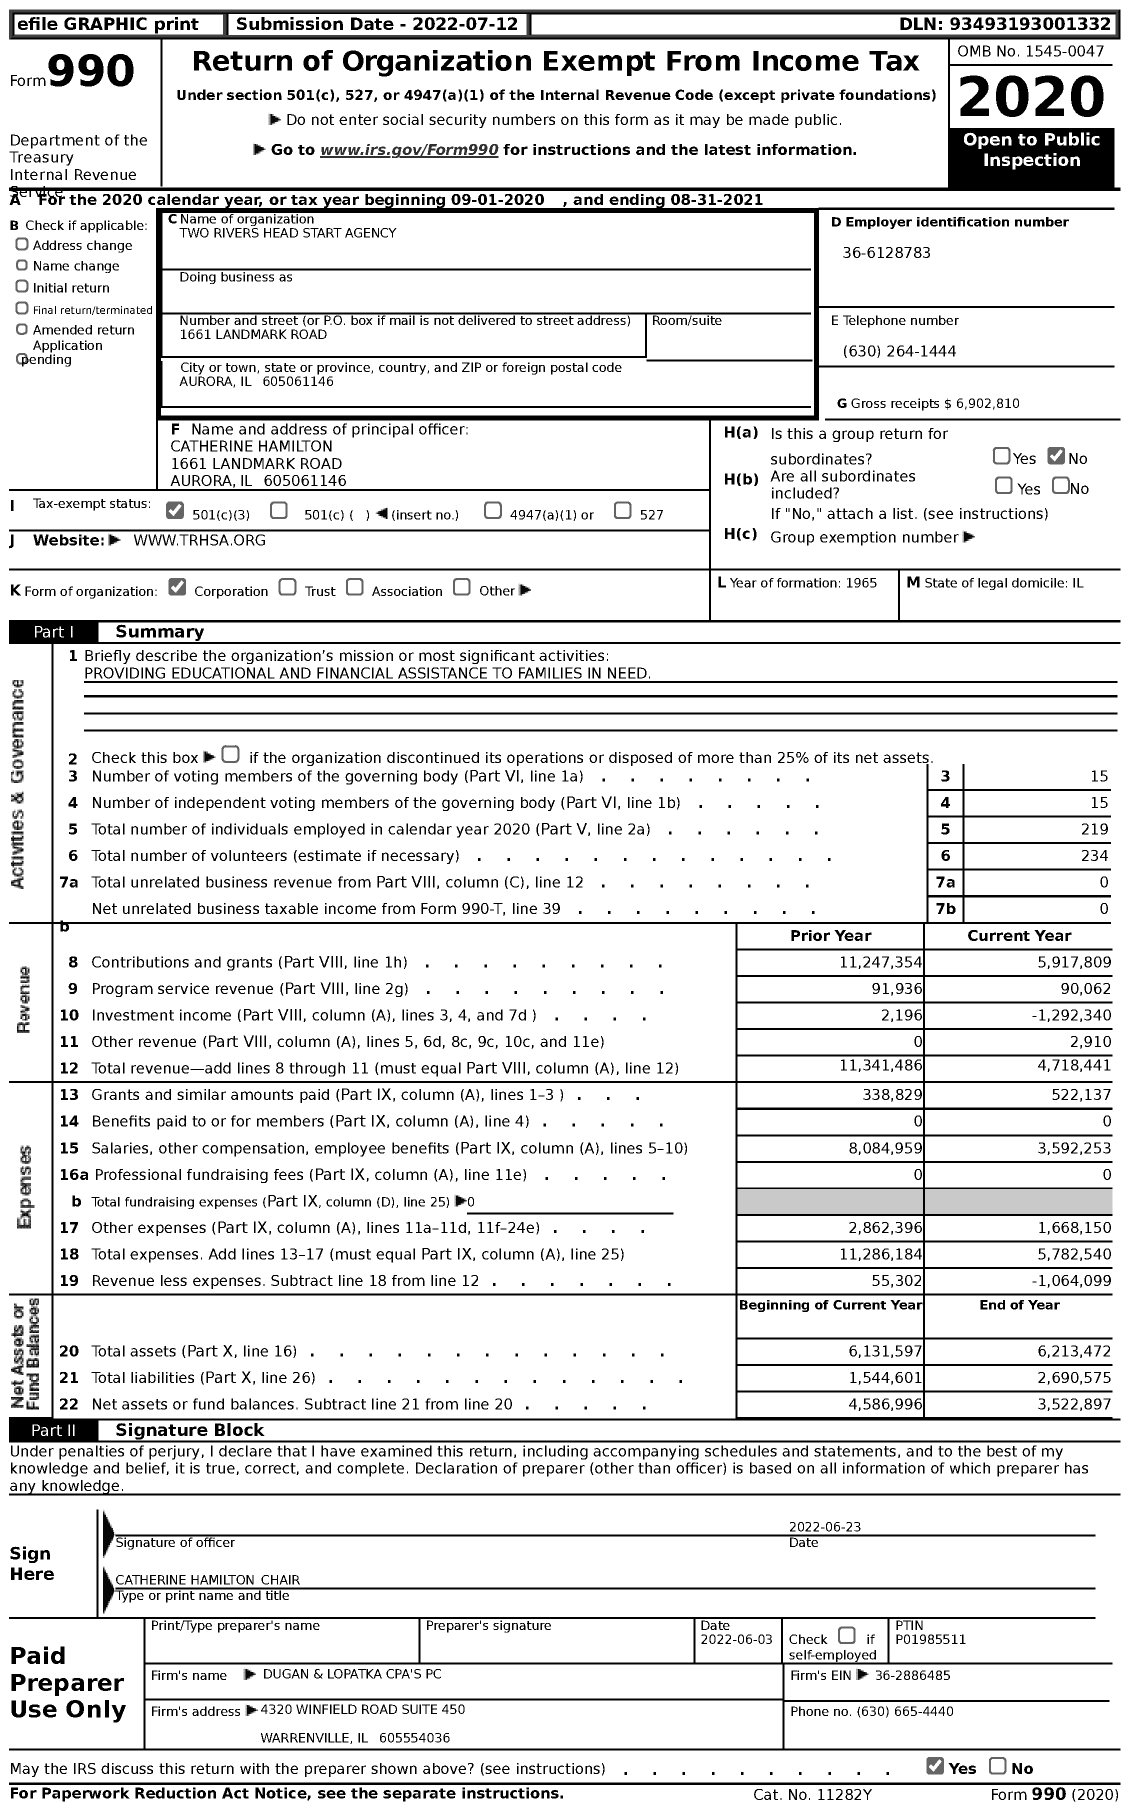 Image of first page of 2020 Form 990 for Two Rivers Head Start Agency